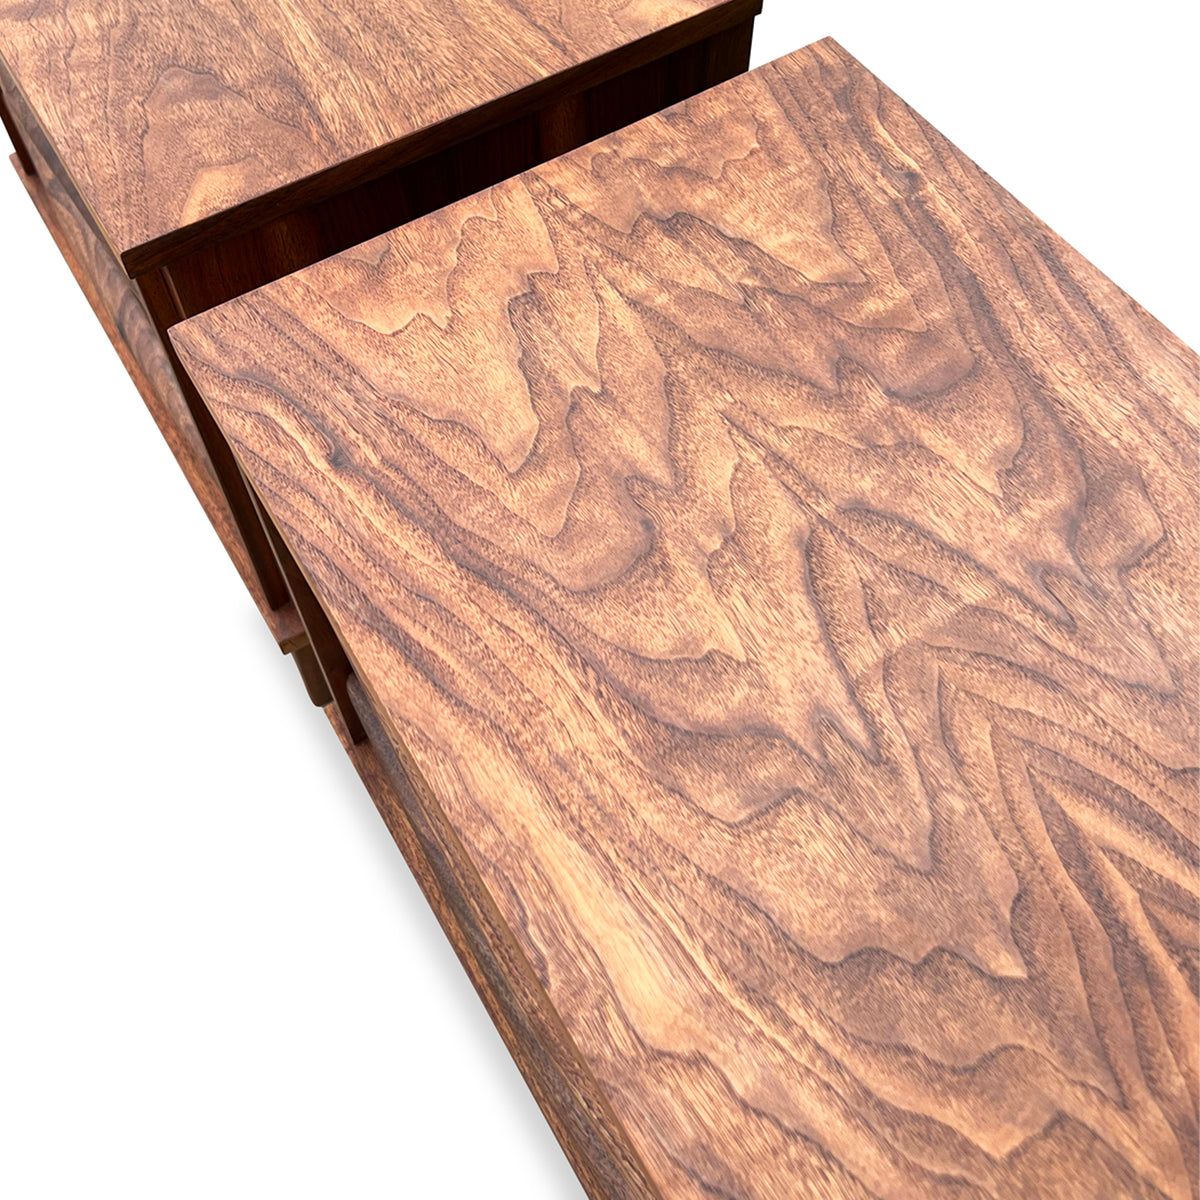 Walnut Nightstands by Princeville